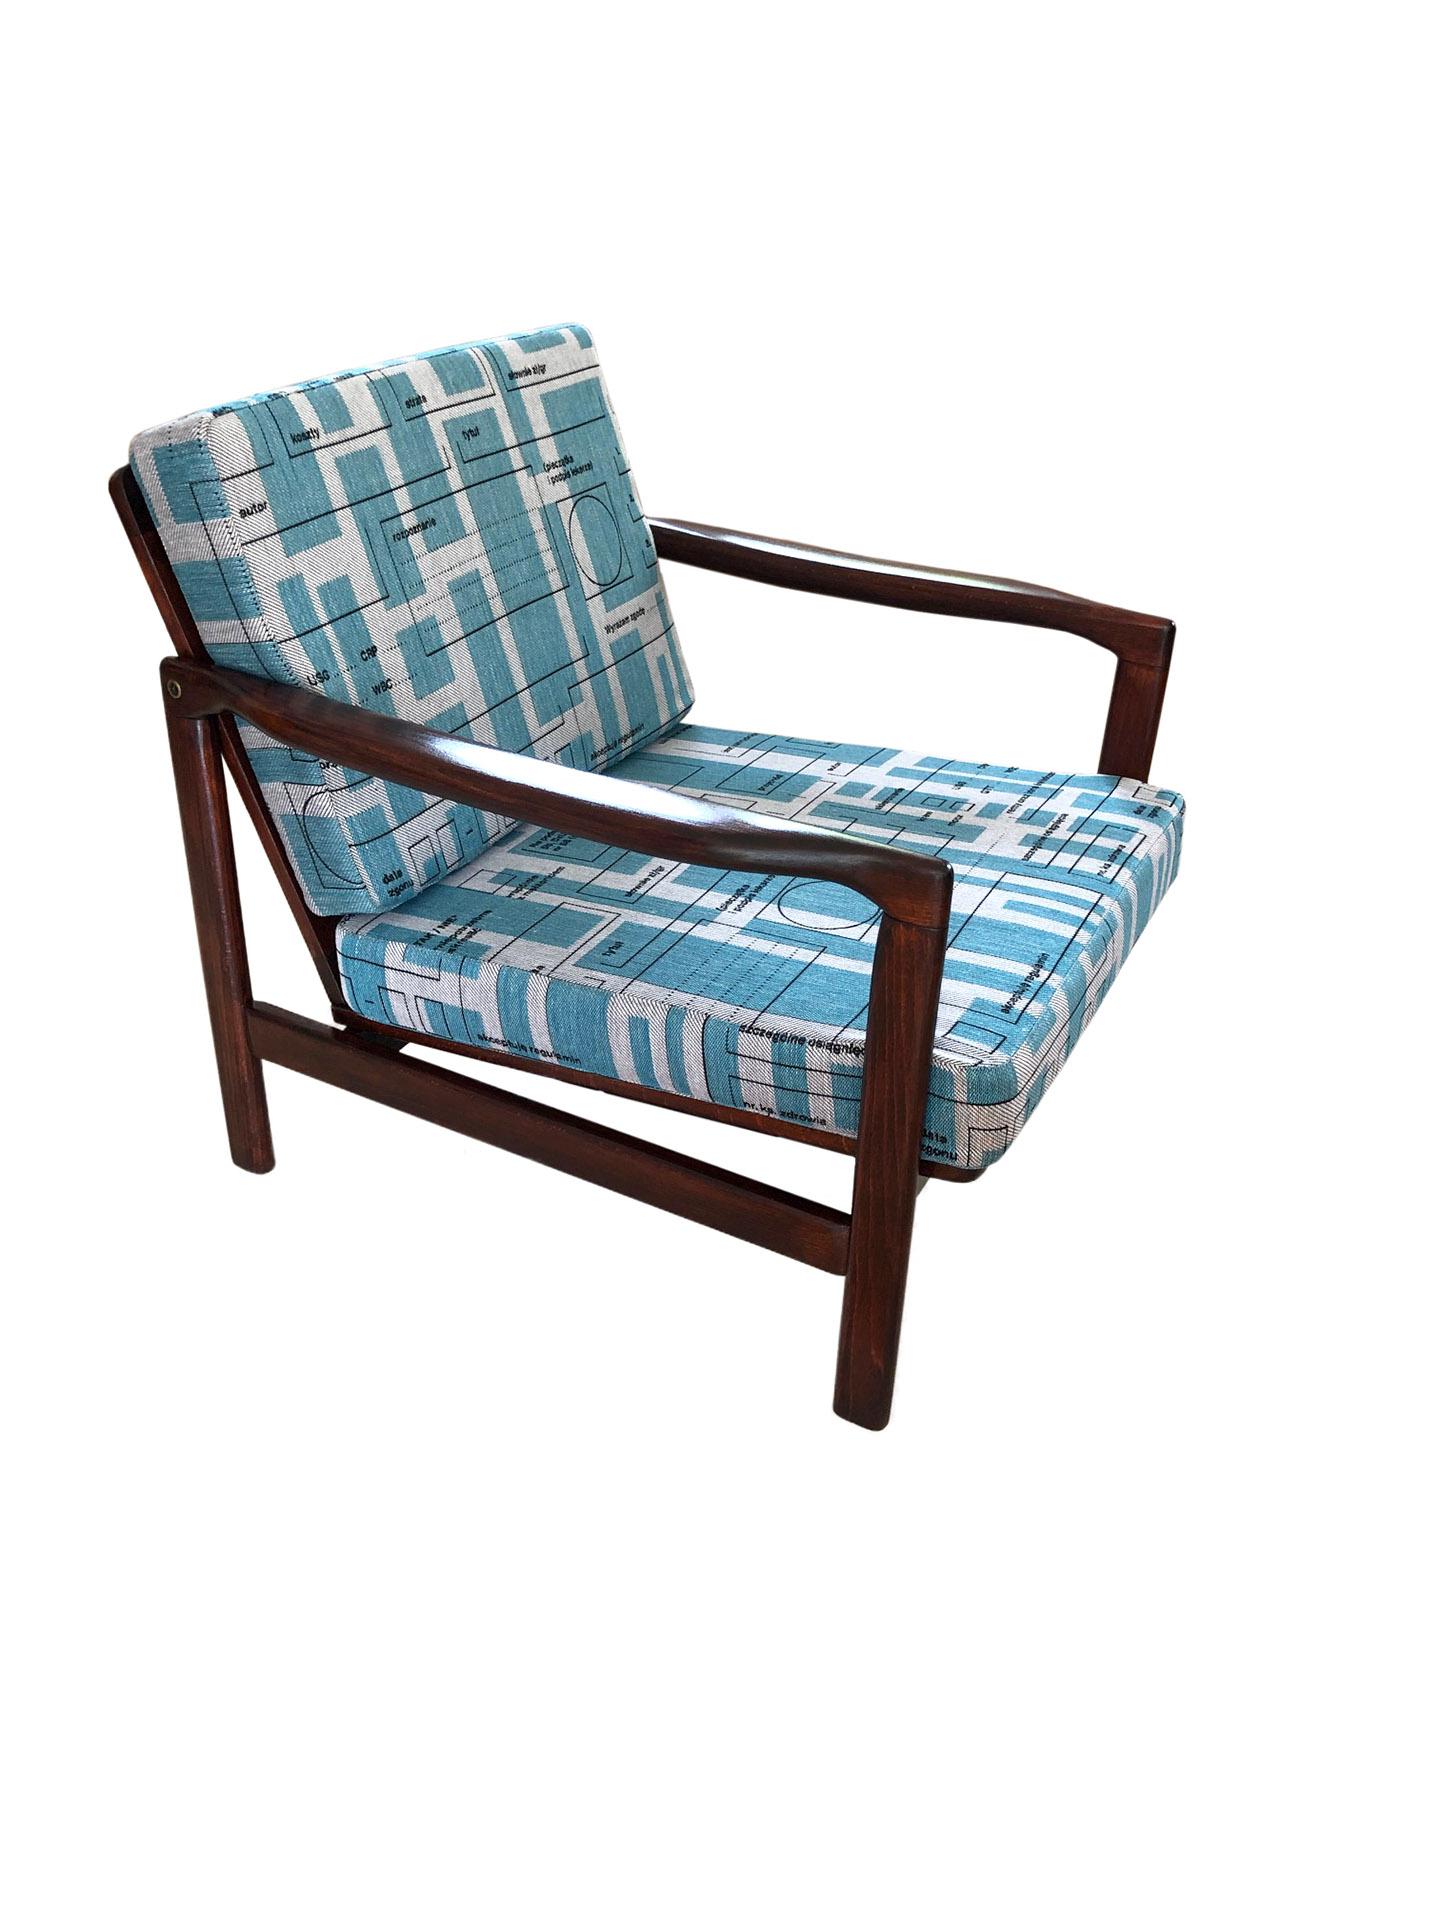 Mid-Century Modern Midcentury Lounge Armchairs Set in Blue Jacquard, Zenon Bączyk, 1960s For Sale